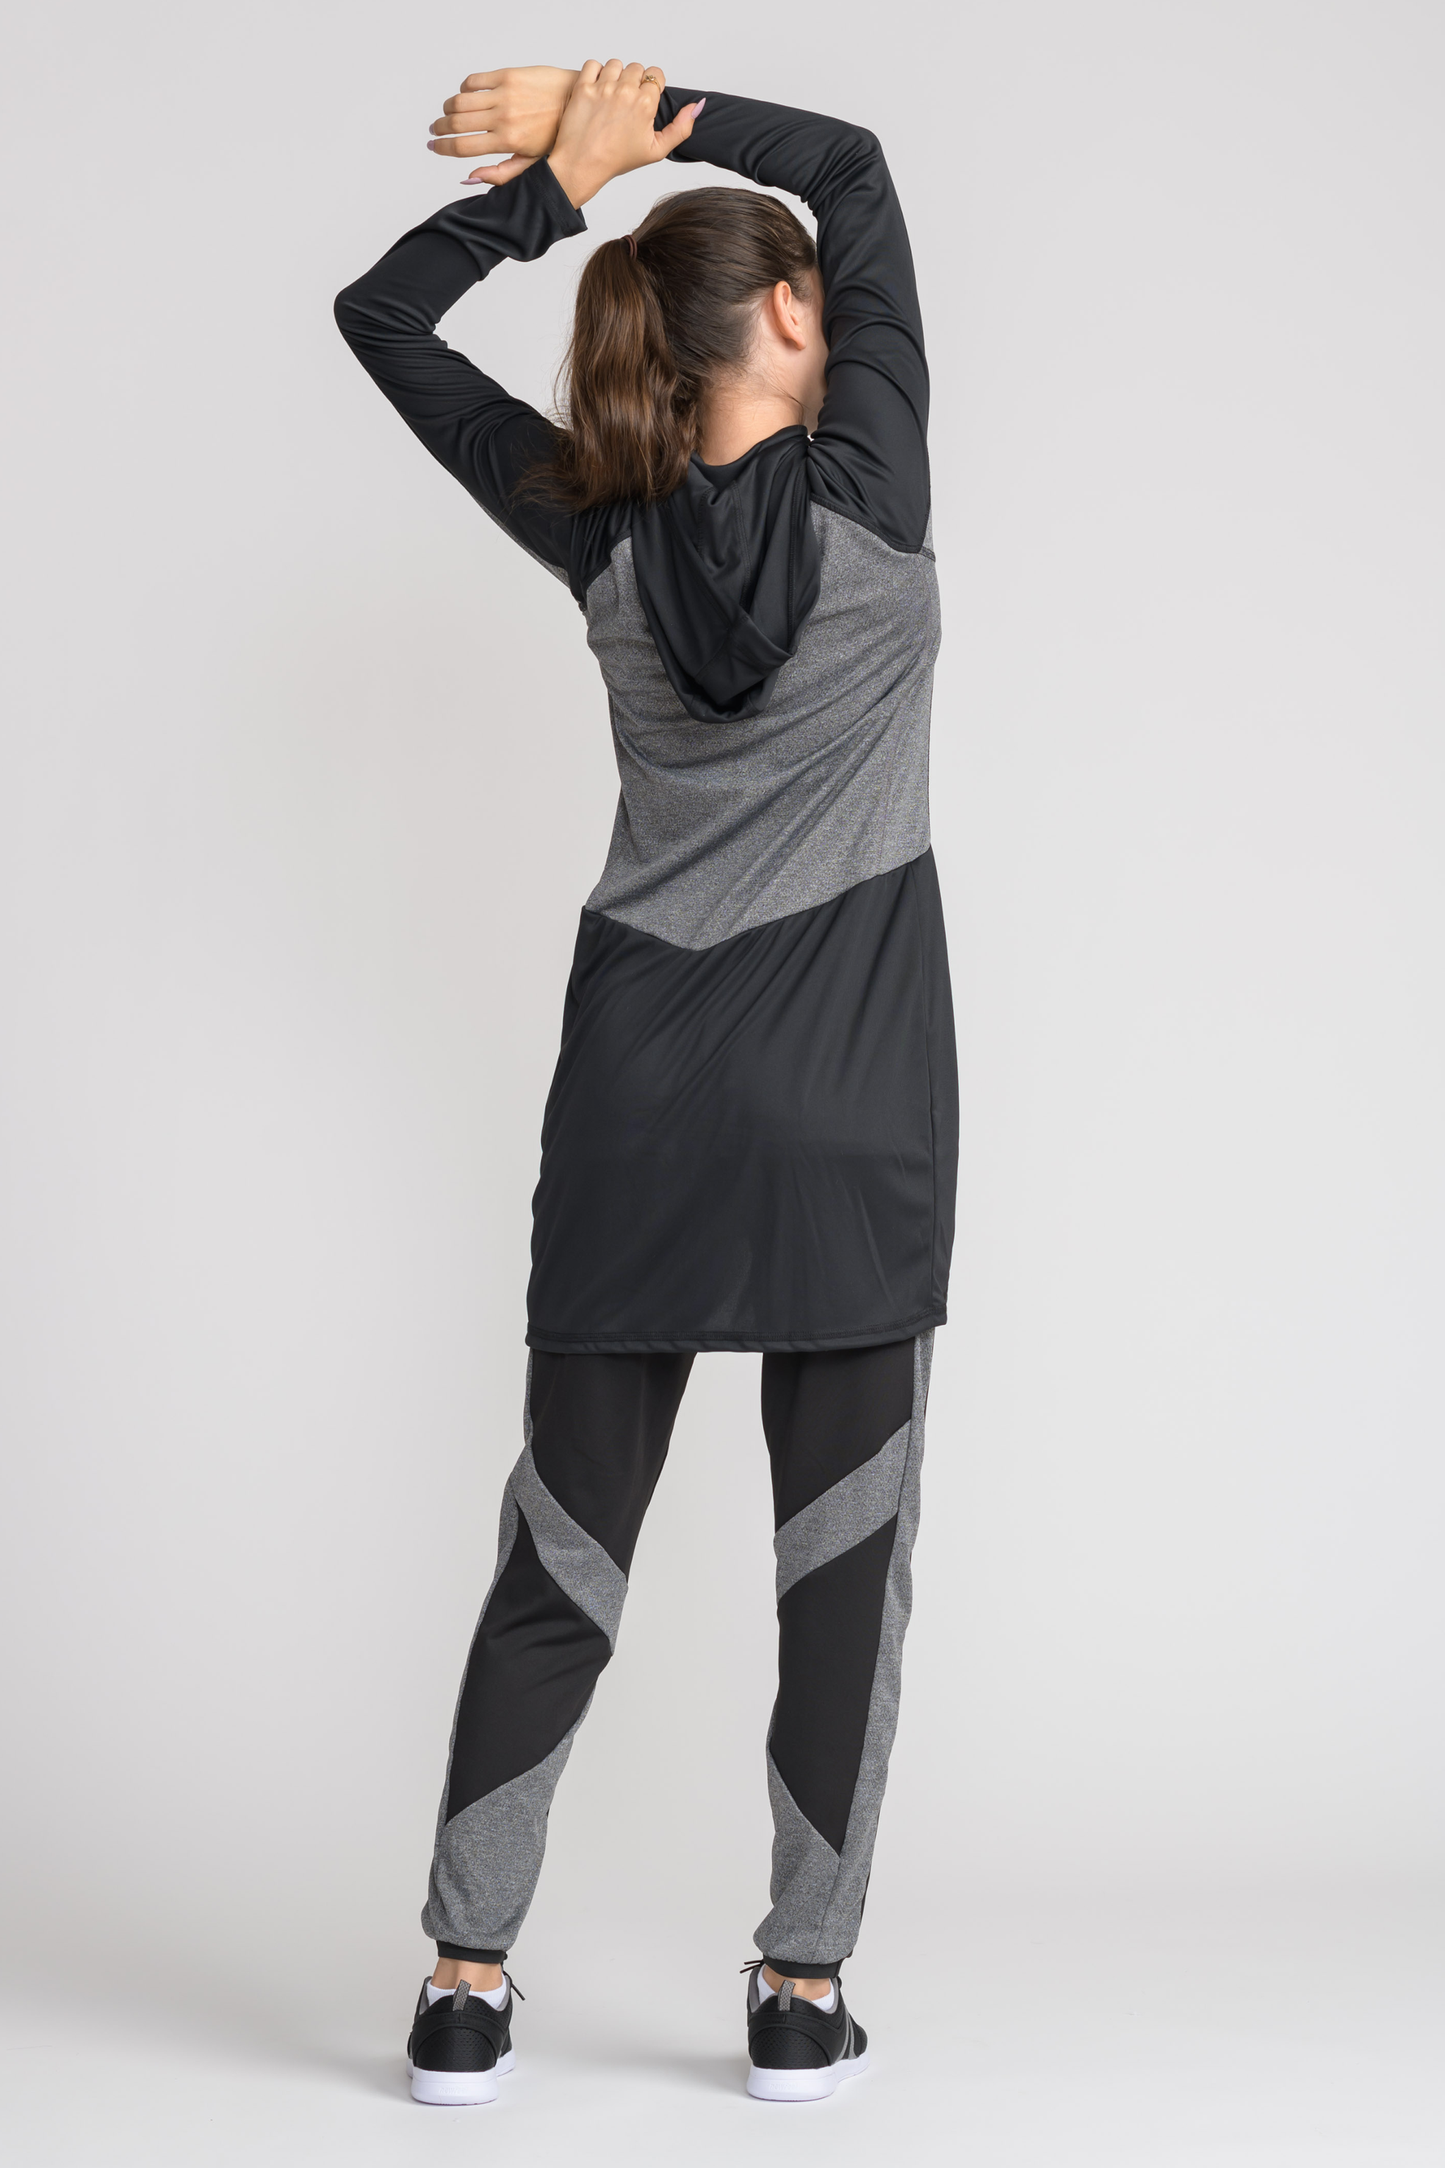 Performance Tech Top - Black (S, M) - sportswear tops - Dignitii Activewear - Third Culture Boutique